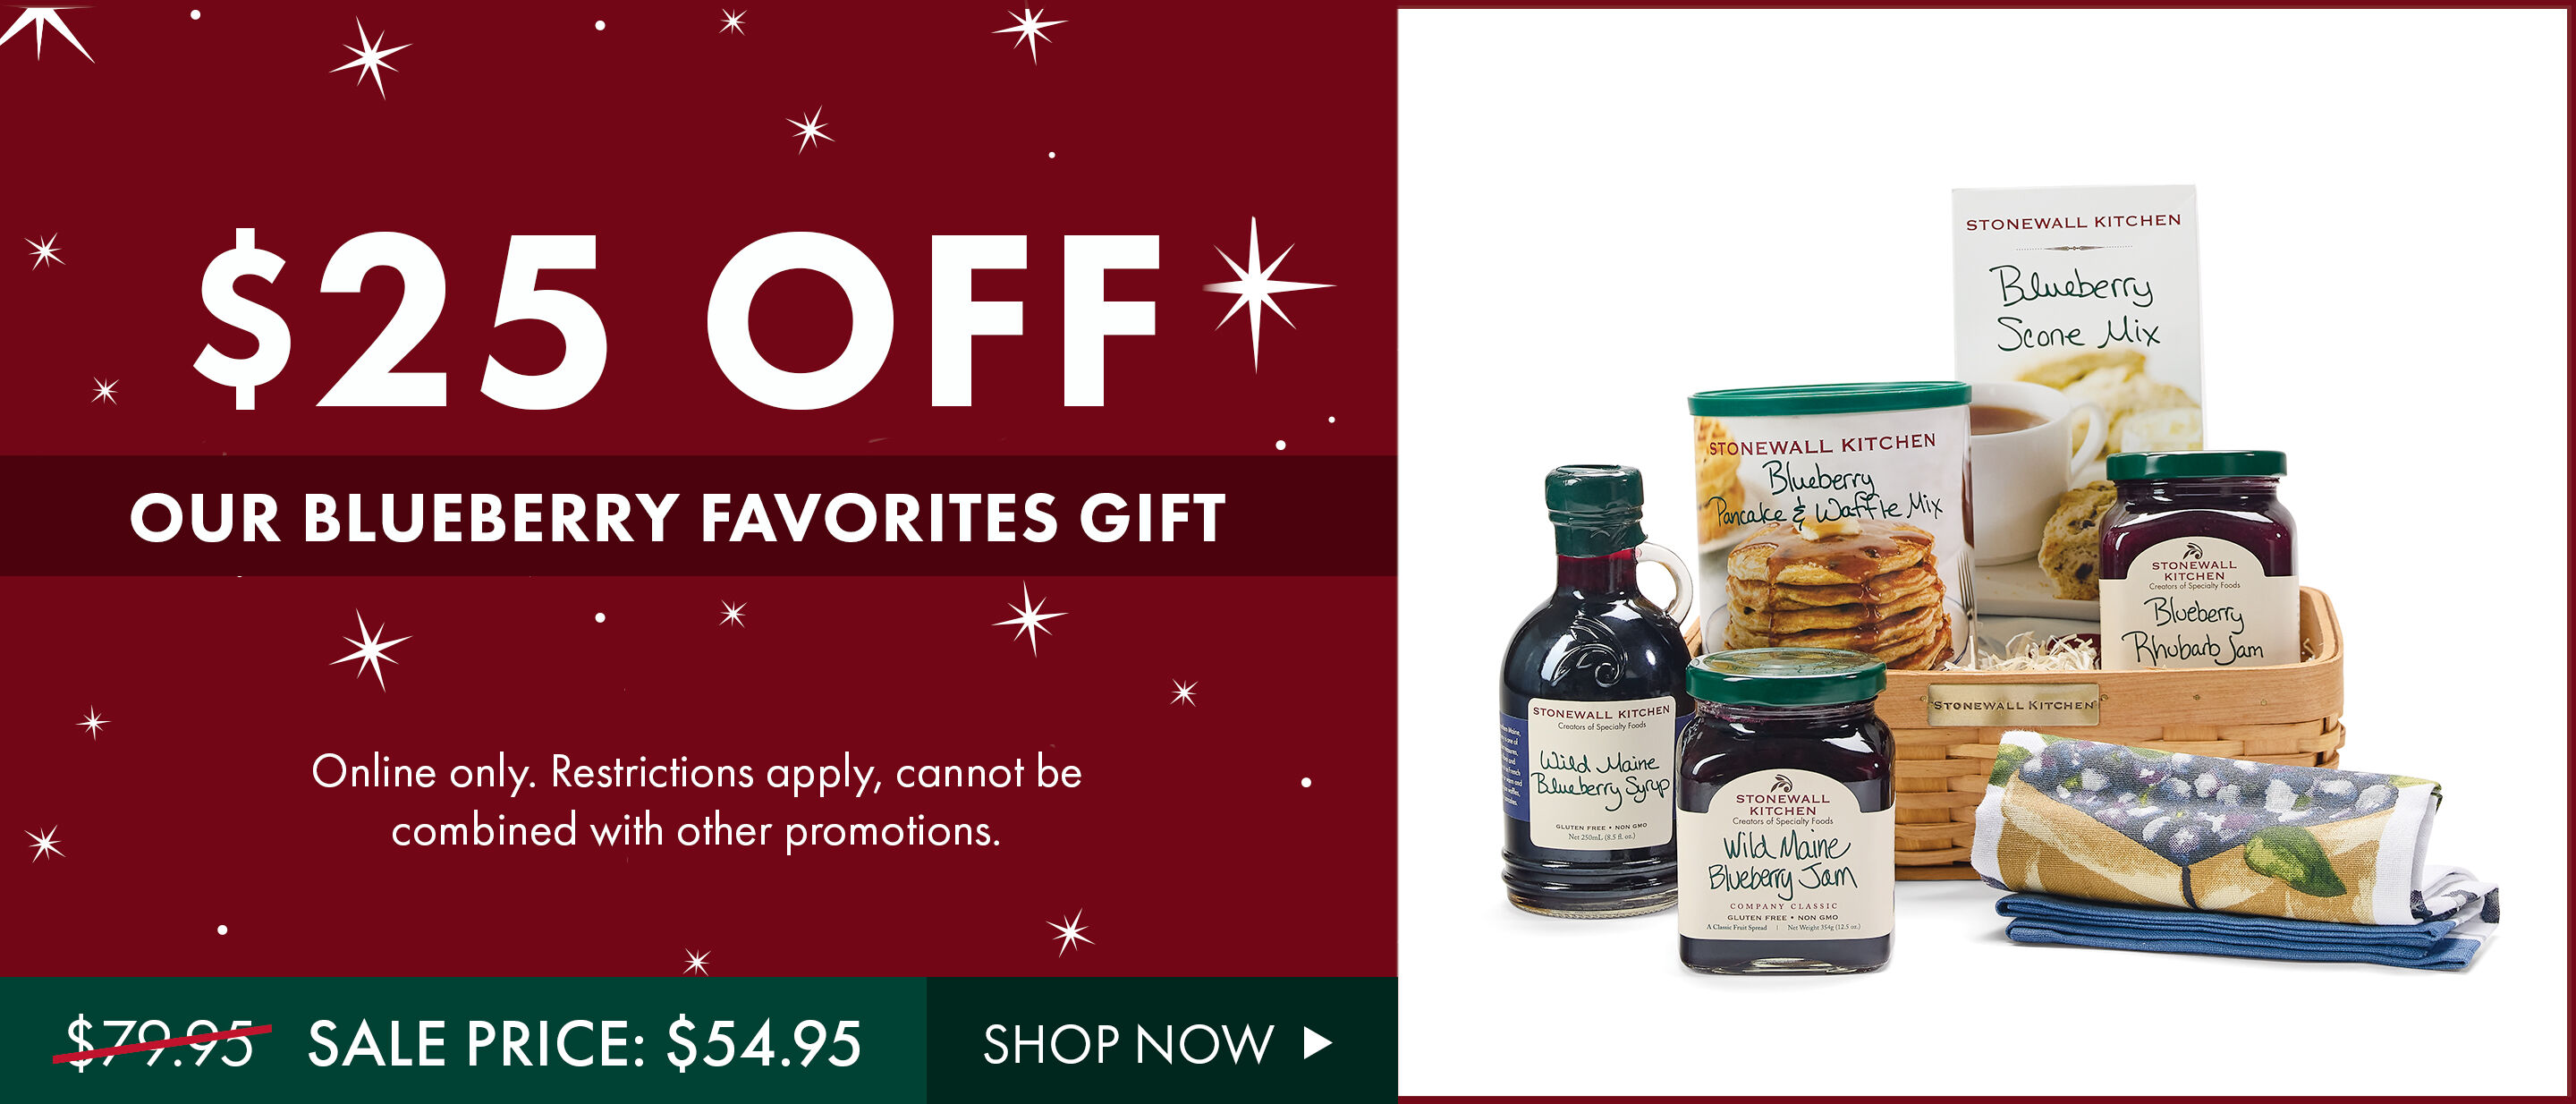 Ring In The Savings - Save $15 on our Holiday Breakfast Box Gift - 30% Off - Shop Now